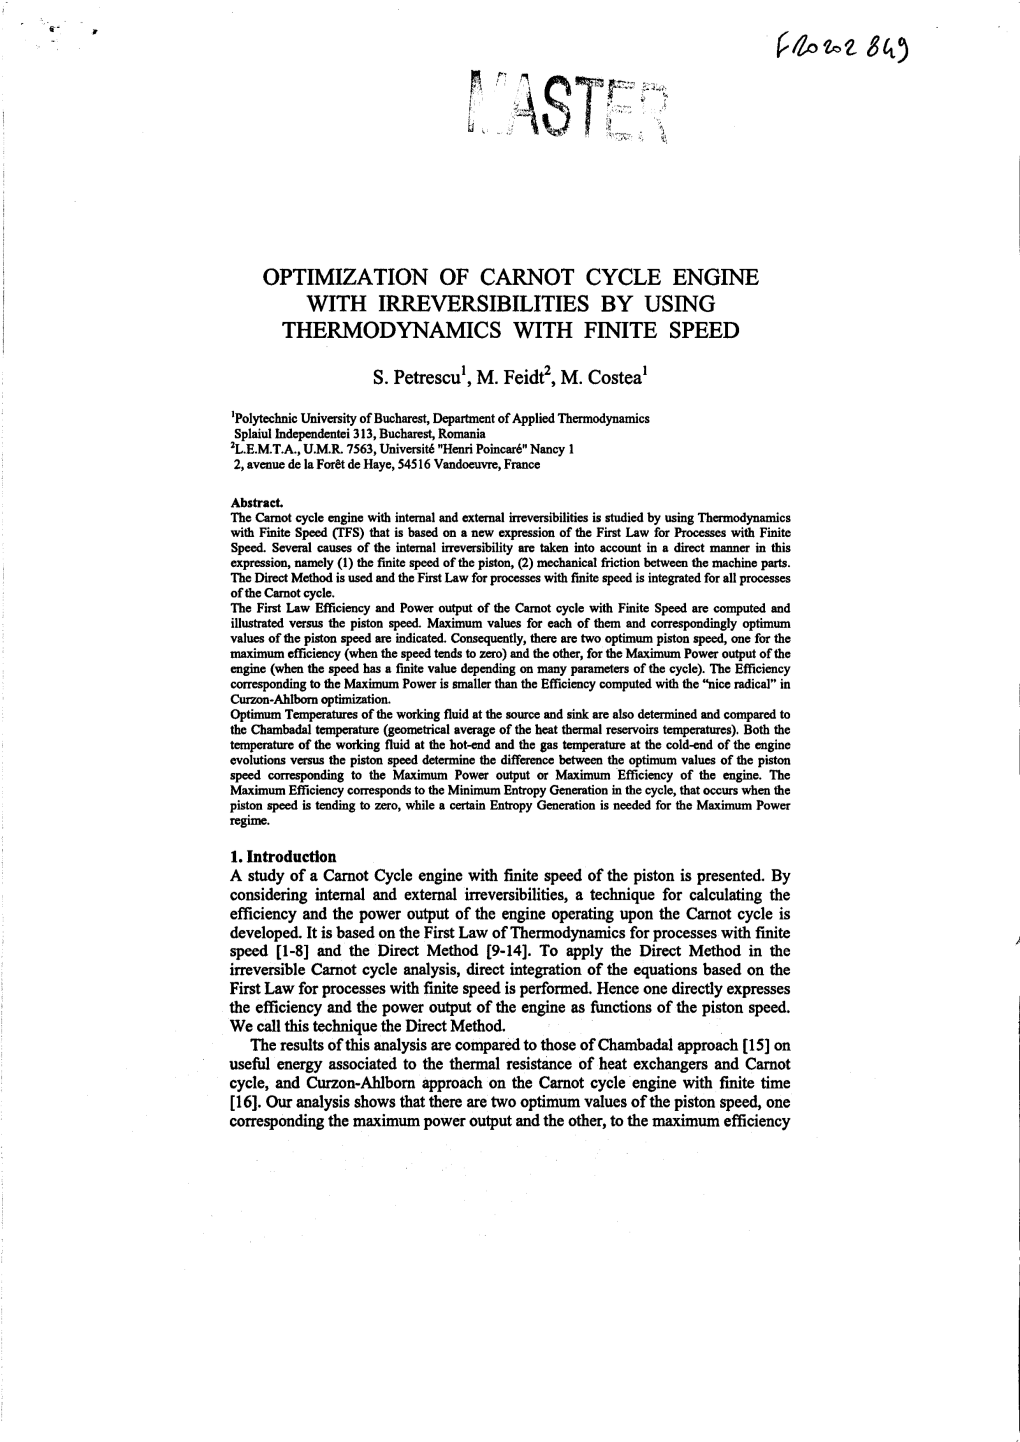 Optimization of Carnot Cycle Engine with Irreversibilities by Using Thermodynamics with Finite Speed